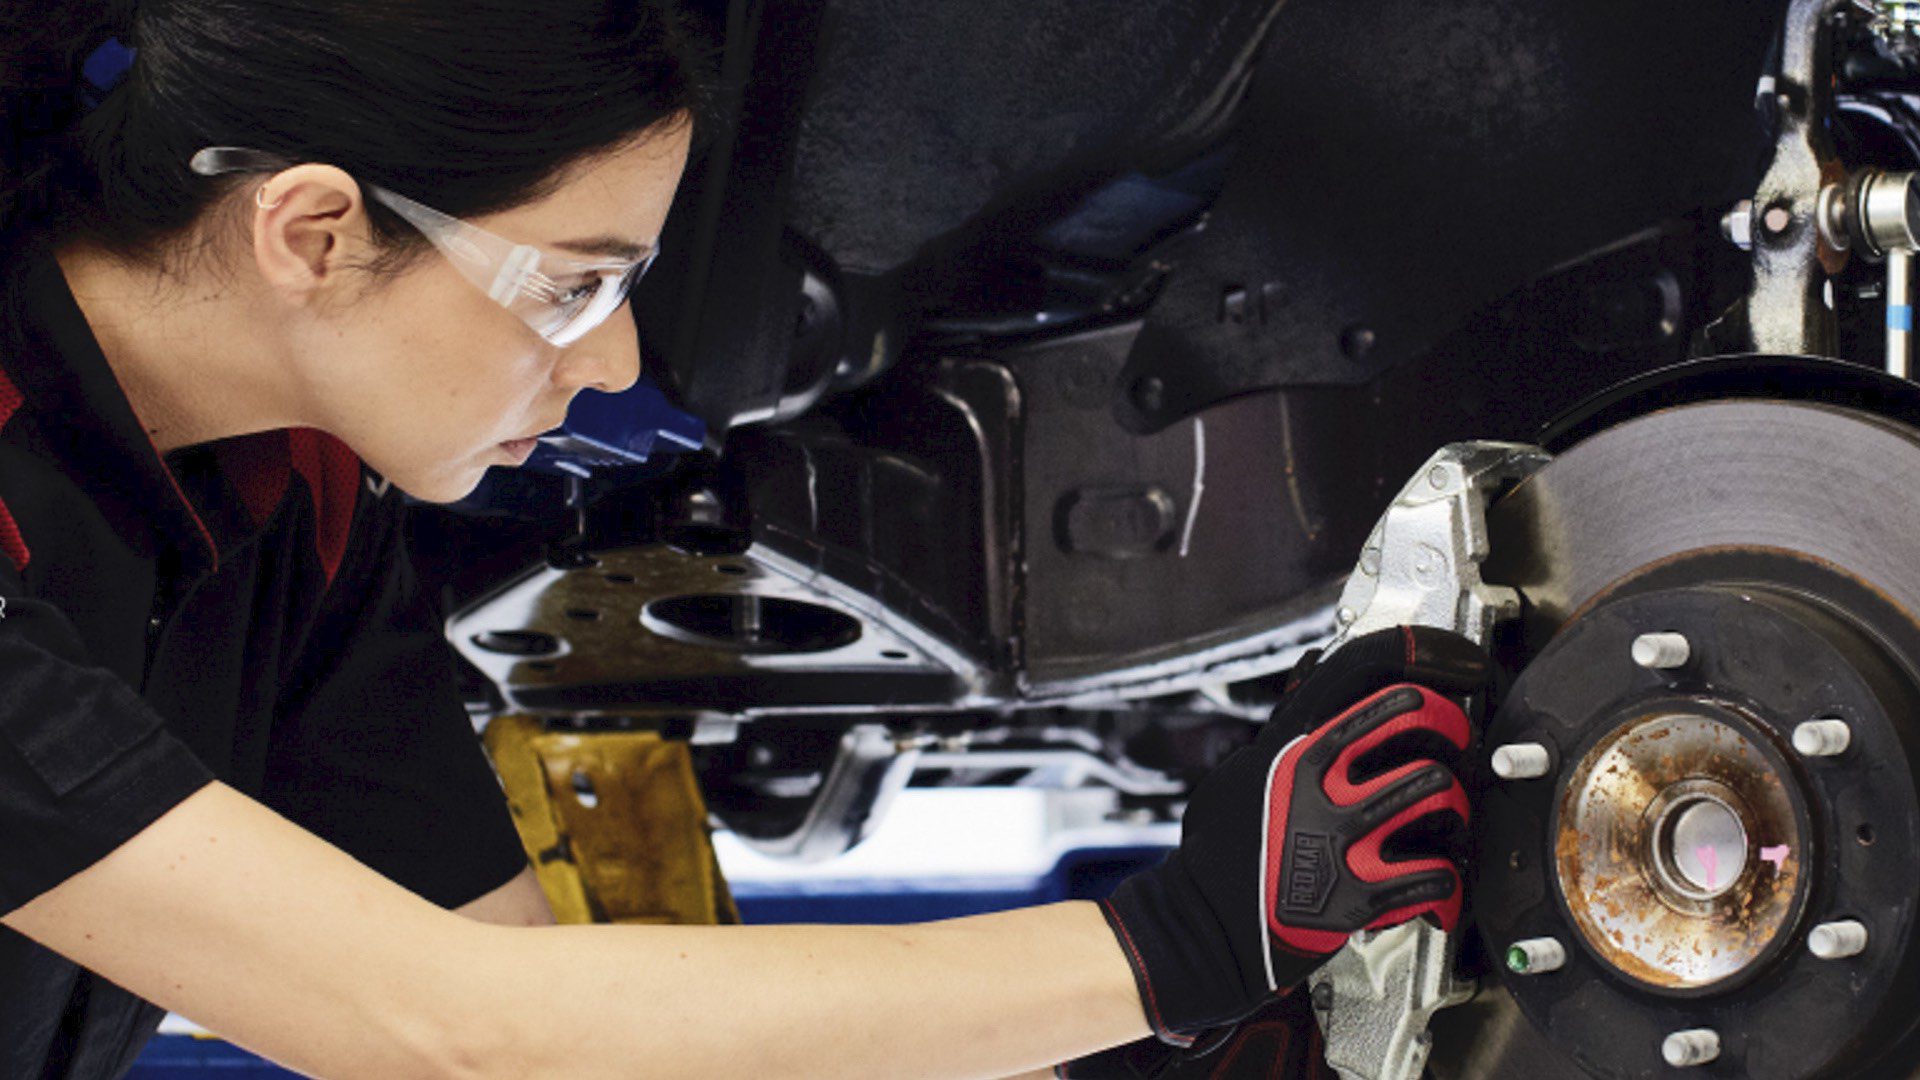 Young woman working on auto repair